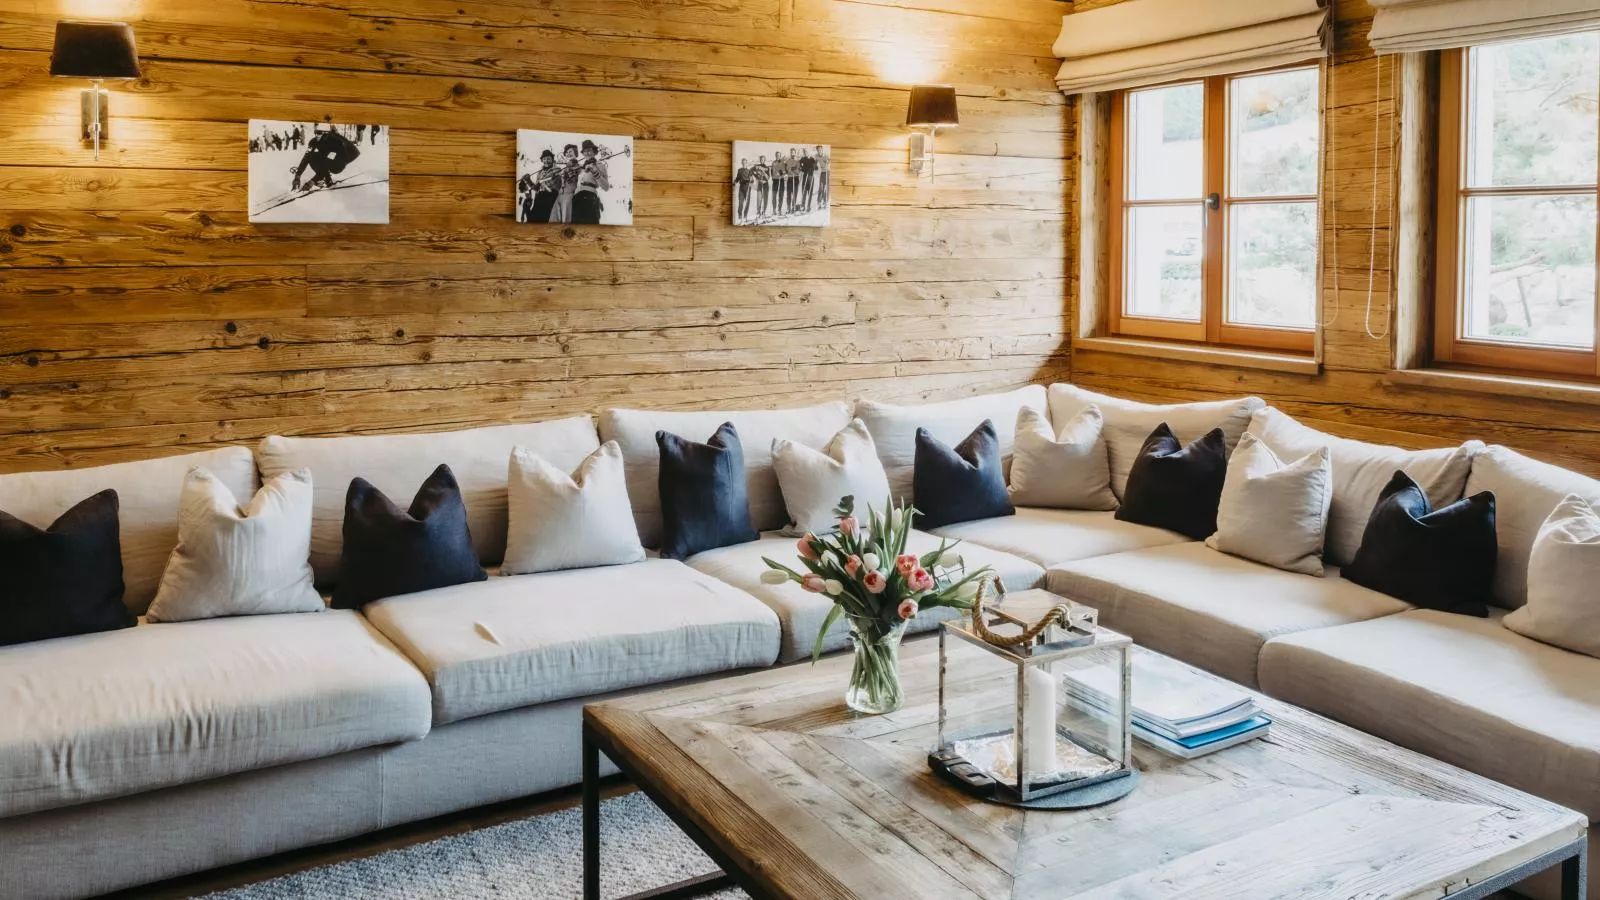 Kitz Boutique Chalet am Lift-Woonkamer